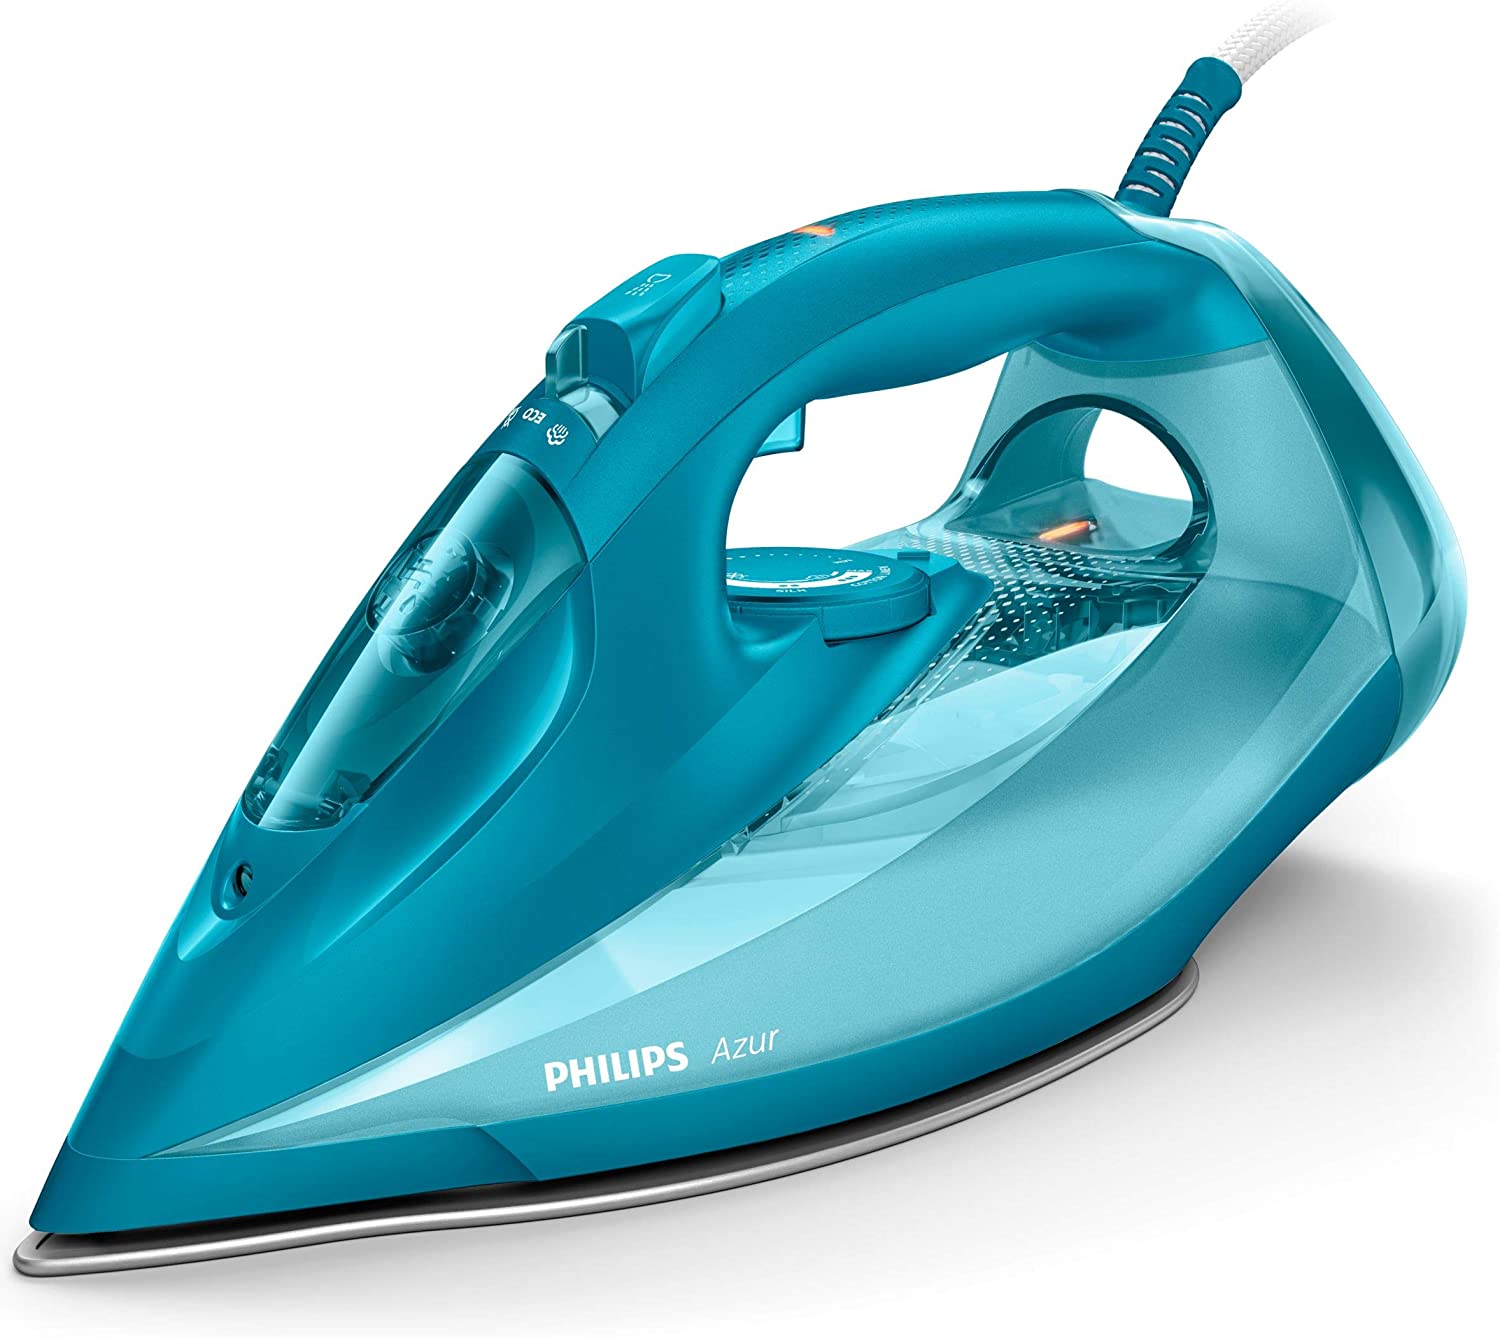 Philips Azur Steam Iron 2600W - GC4558 | reliable performance | lightweight | variable steam settings | safety features | stylish | even heat distribution | Halabh.com